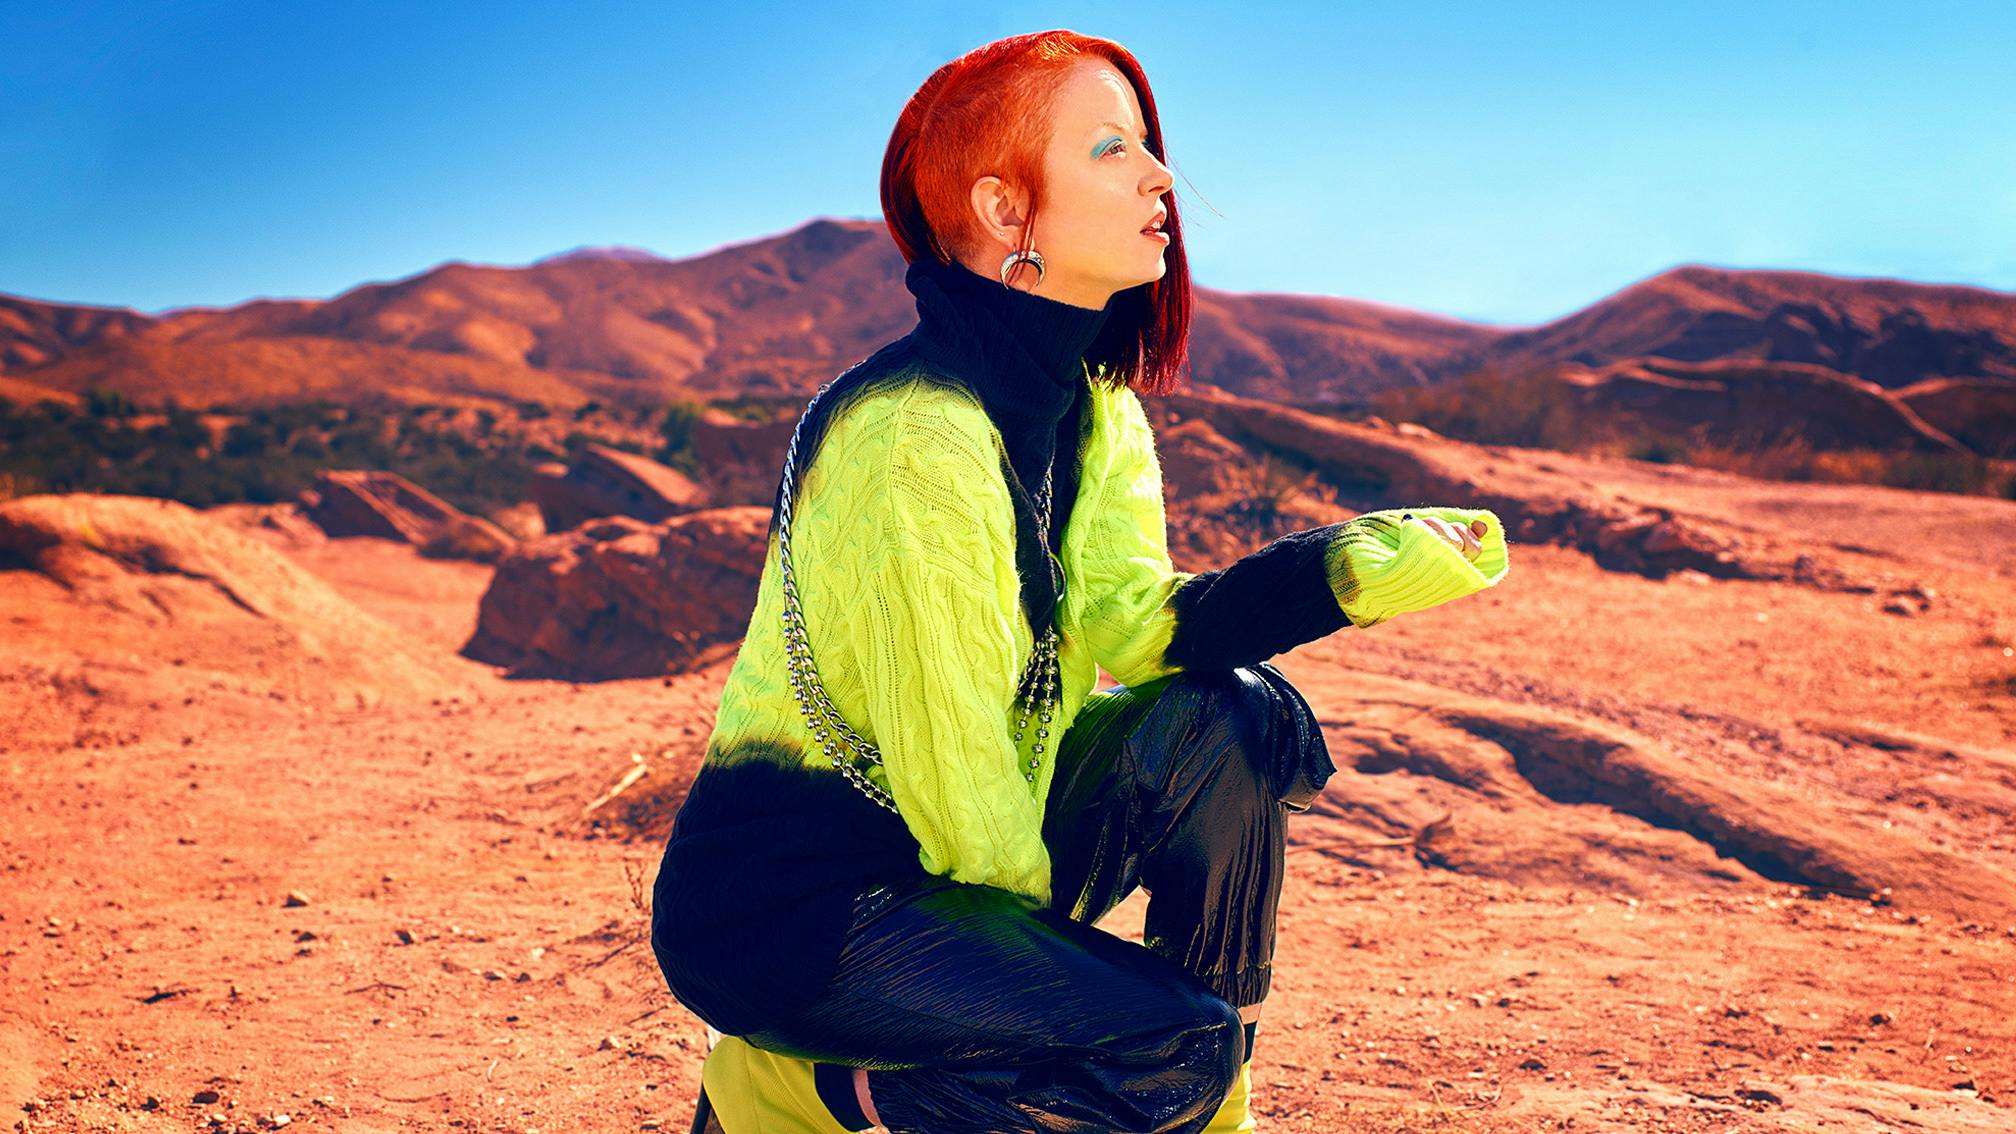 Garbage’s Shirley Manson: “The average musician can no longer survive let alone thrive”